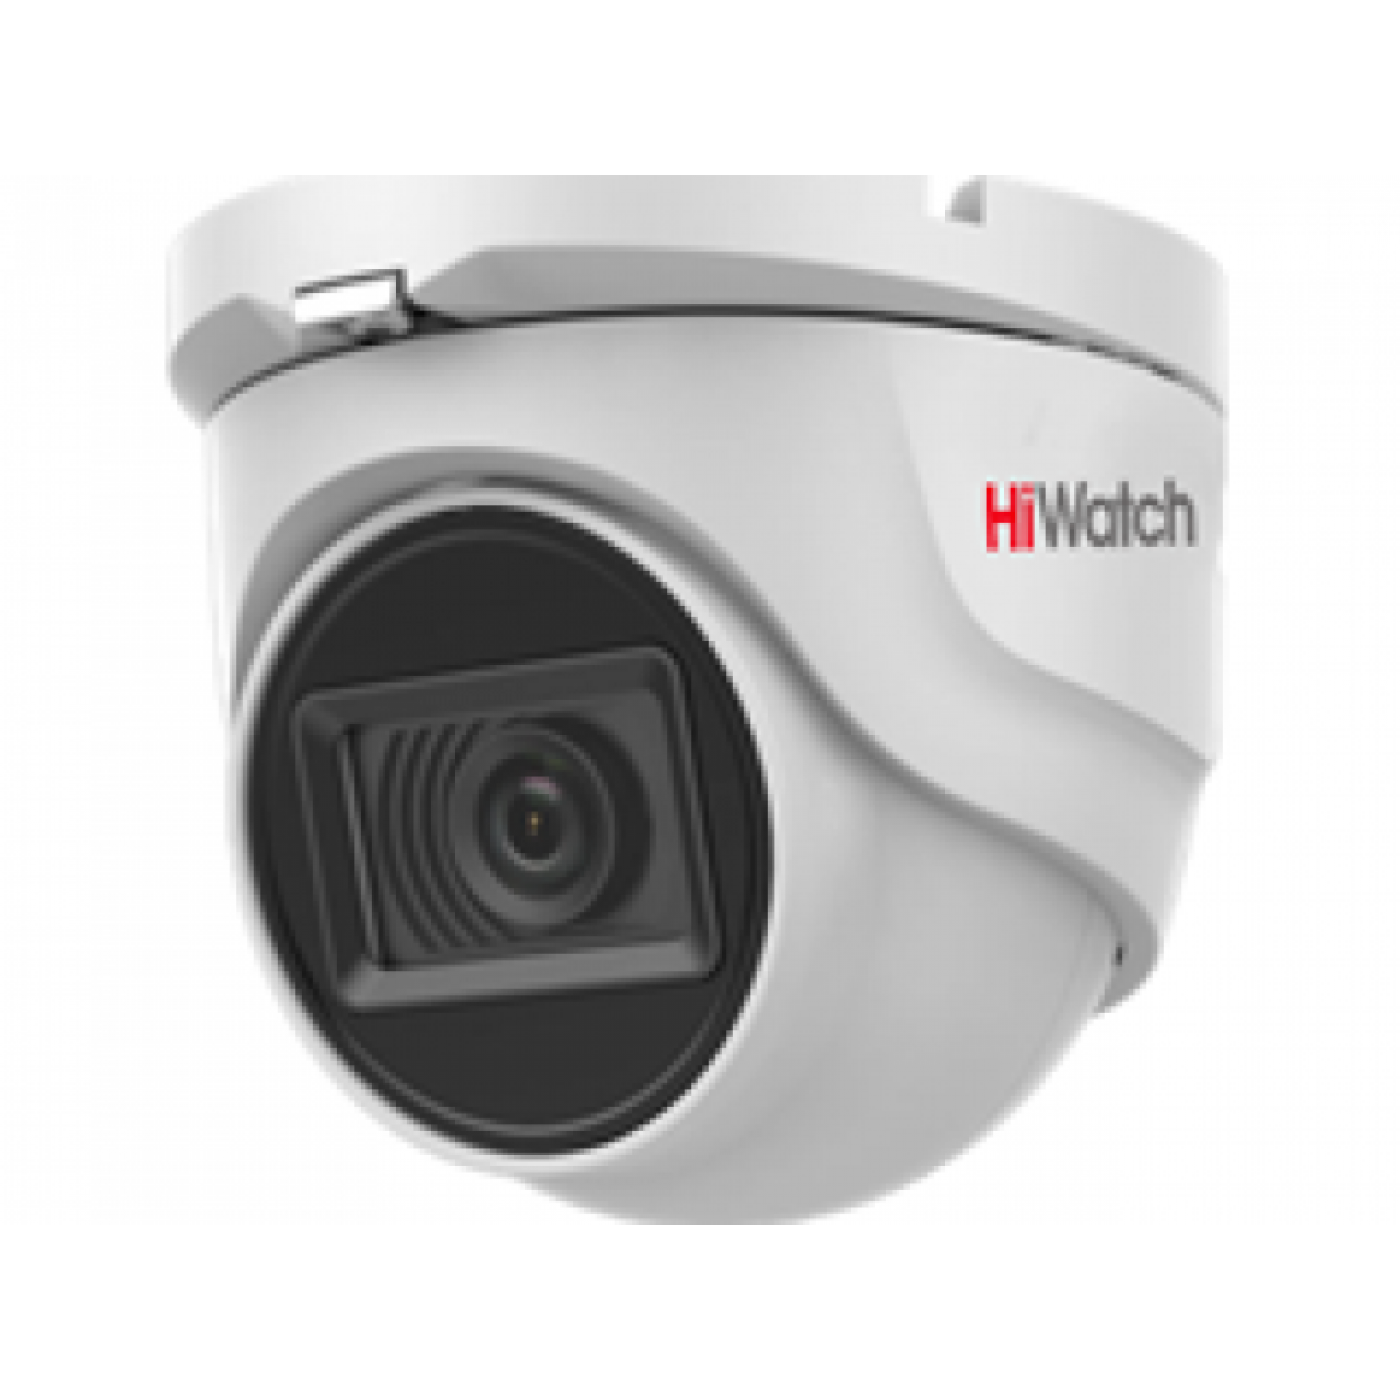 HiWatch DS-T803(B) (2.8 mm)